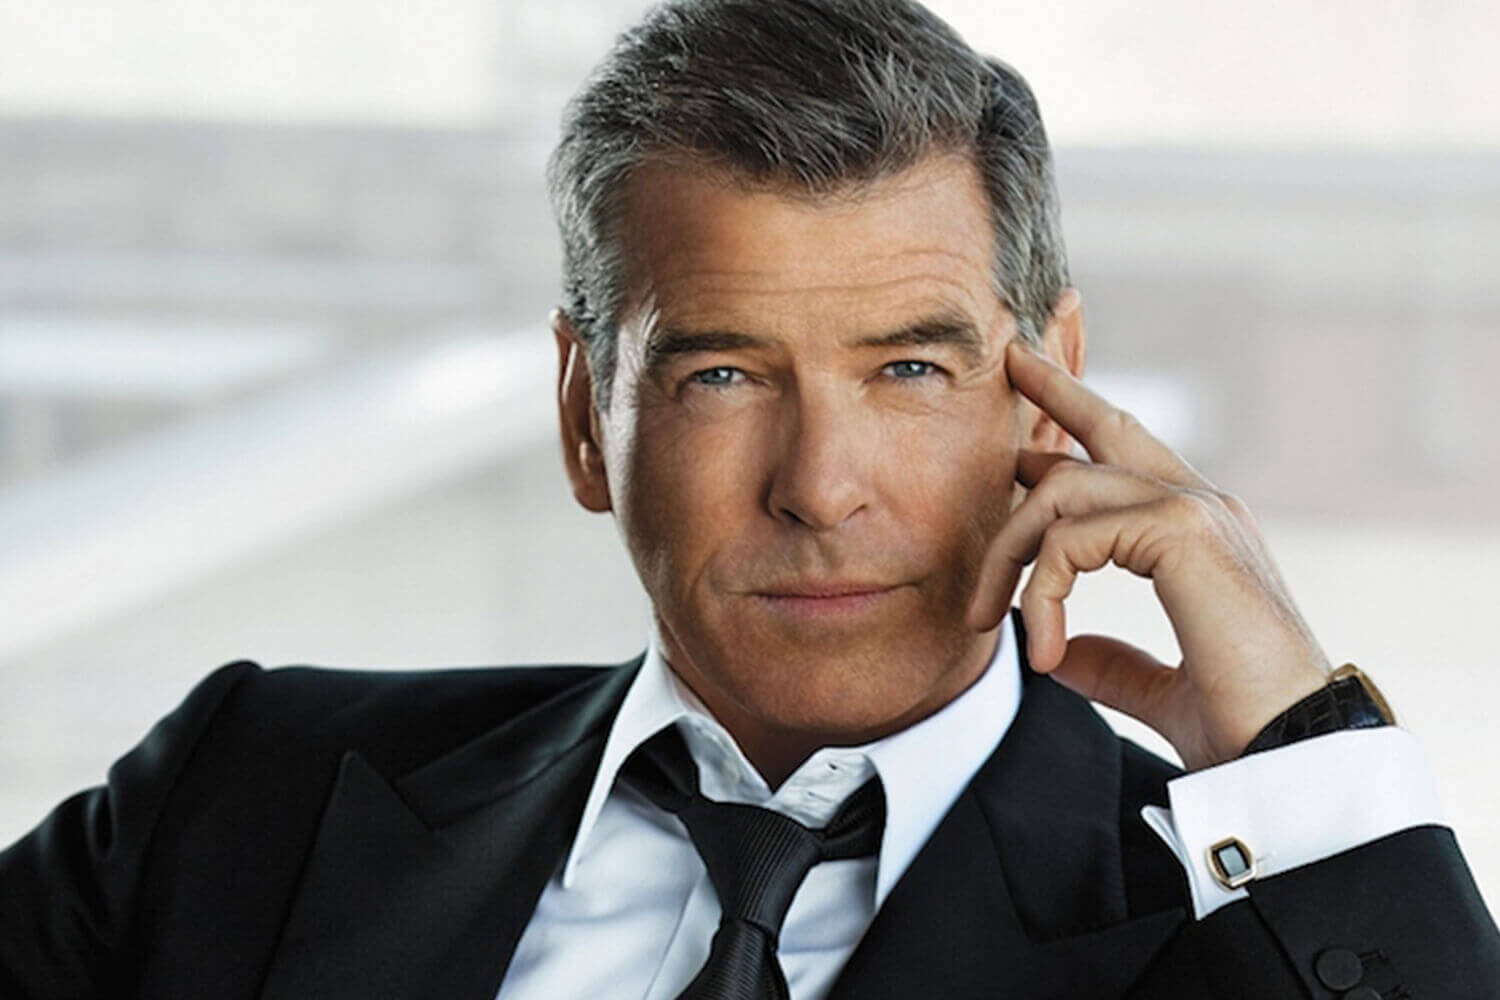 Pierce Brosnan Age, Height, Girlfriend, Wife, Family, Biography & More